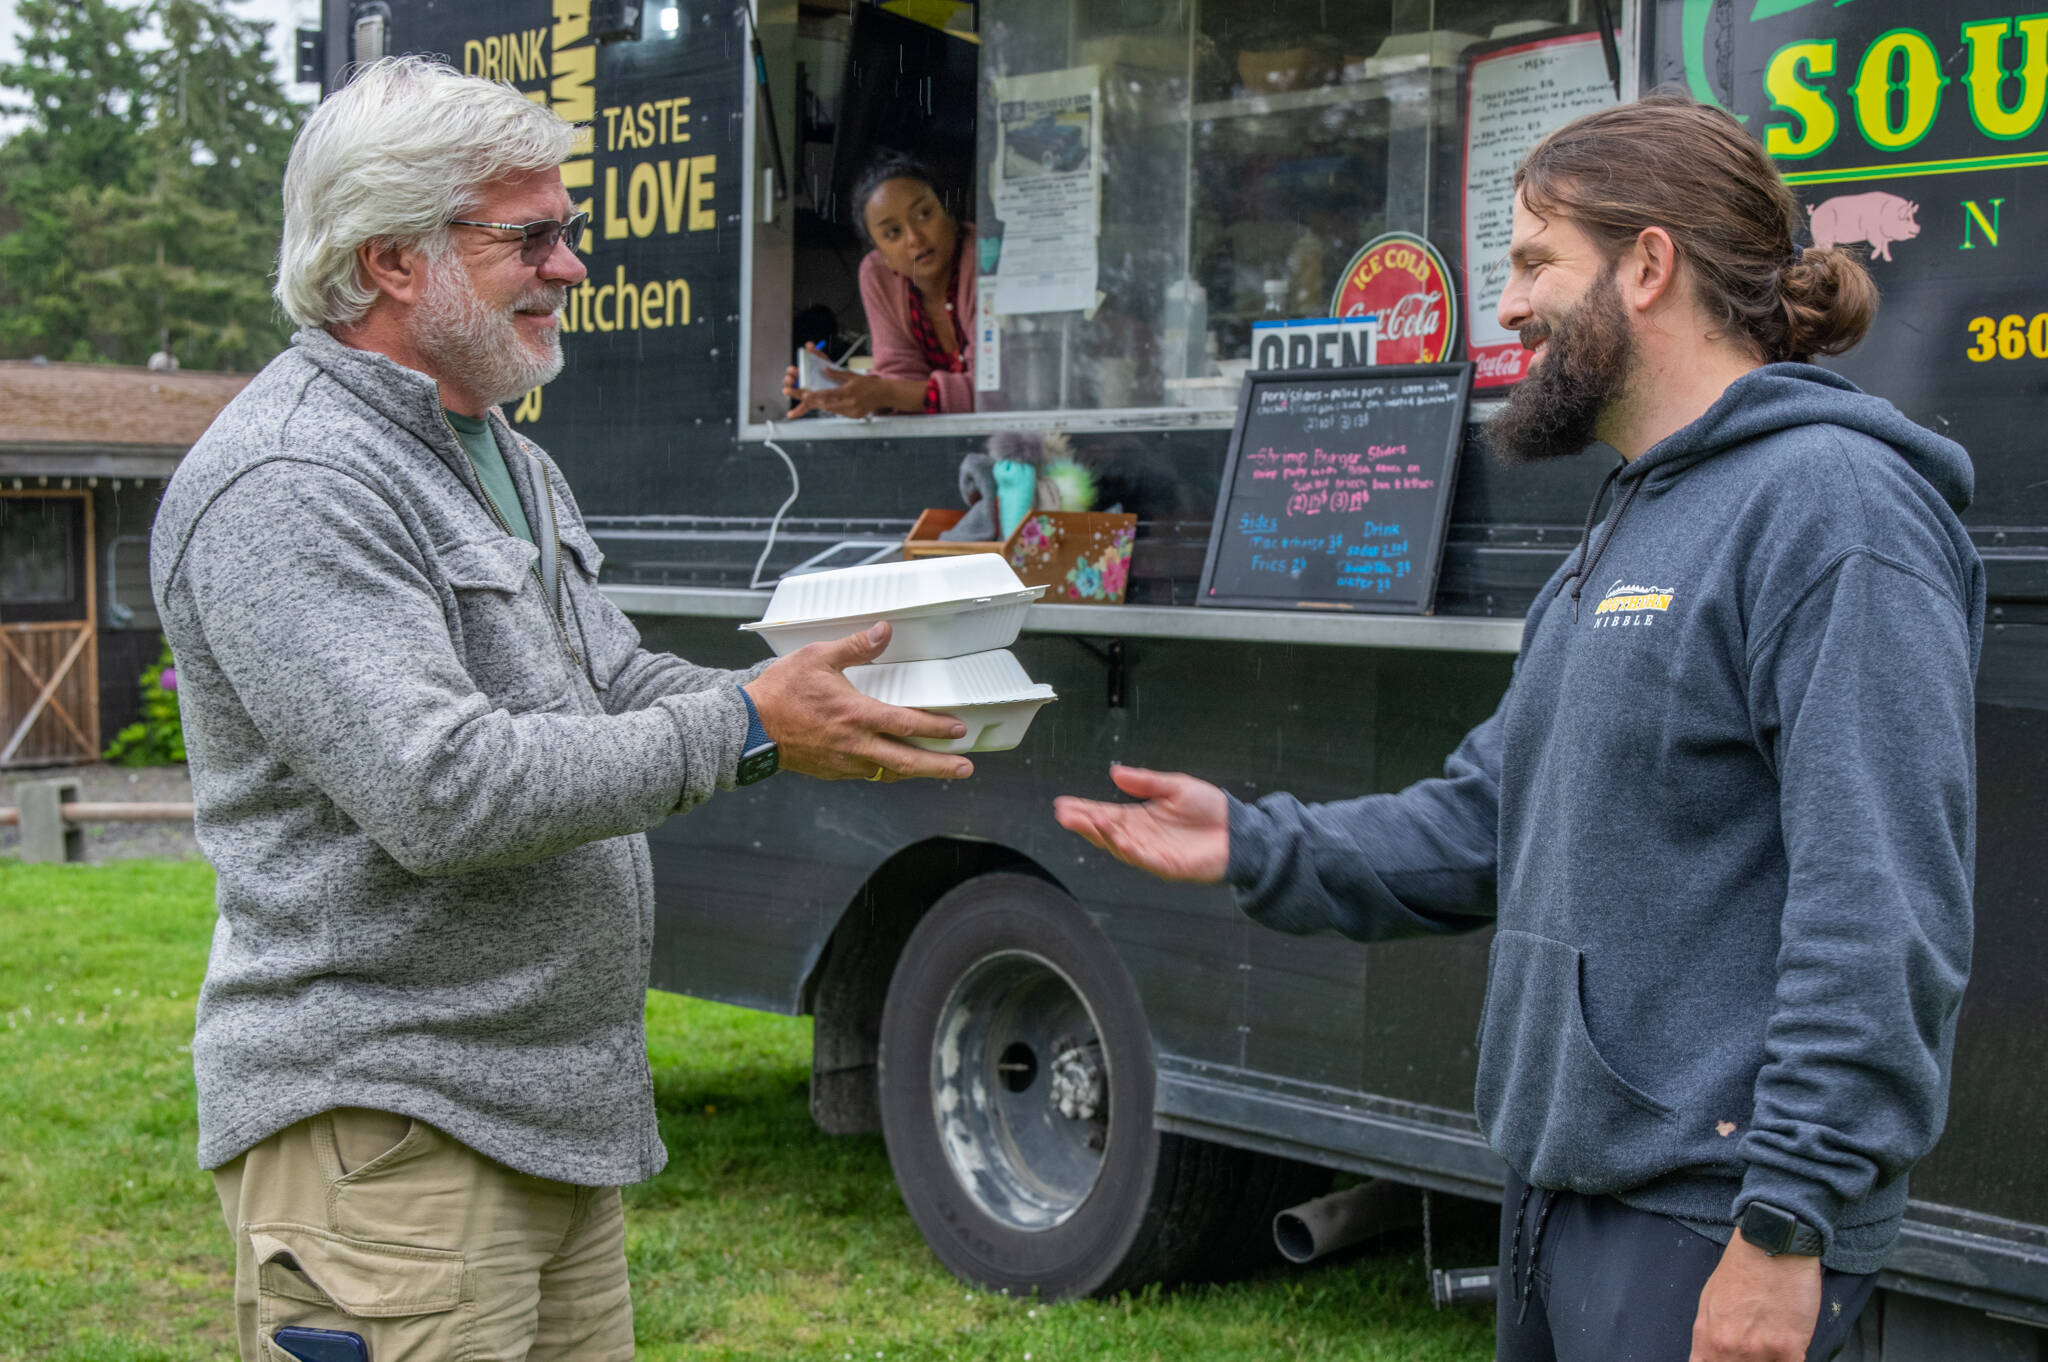 Jay Pederson, a full-time RV traveler, receives dinner for himself and his wife from Caleb Messinger at the Southern Nibble food truck, parked at the John Wayne Marina Resort on the outskirts of Sequim. Sequim Gazette photo by Emily MatthiessenSequim Gazette photo by Emily Matthiessen